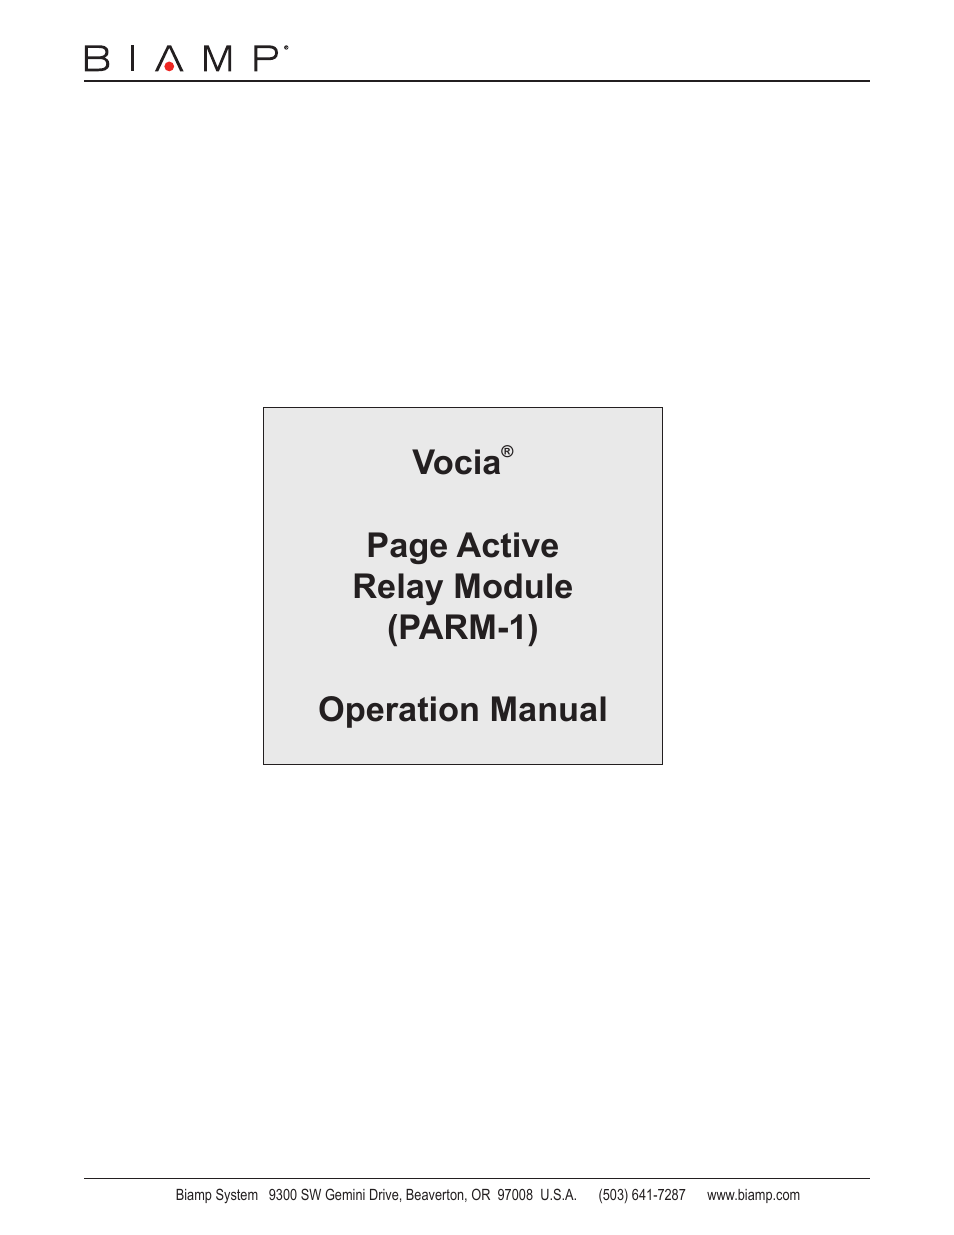 Page Active Relay Module (PARM-1)